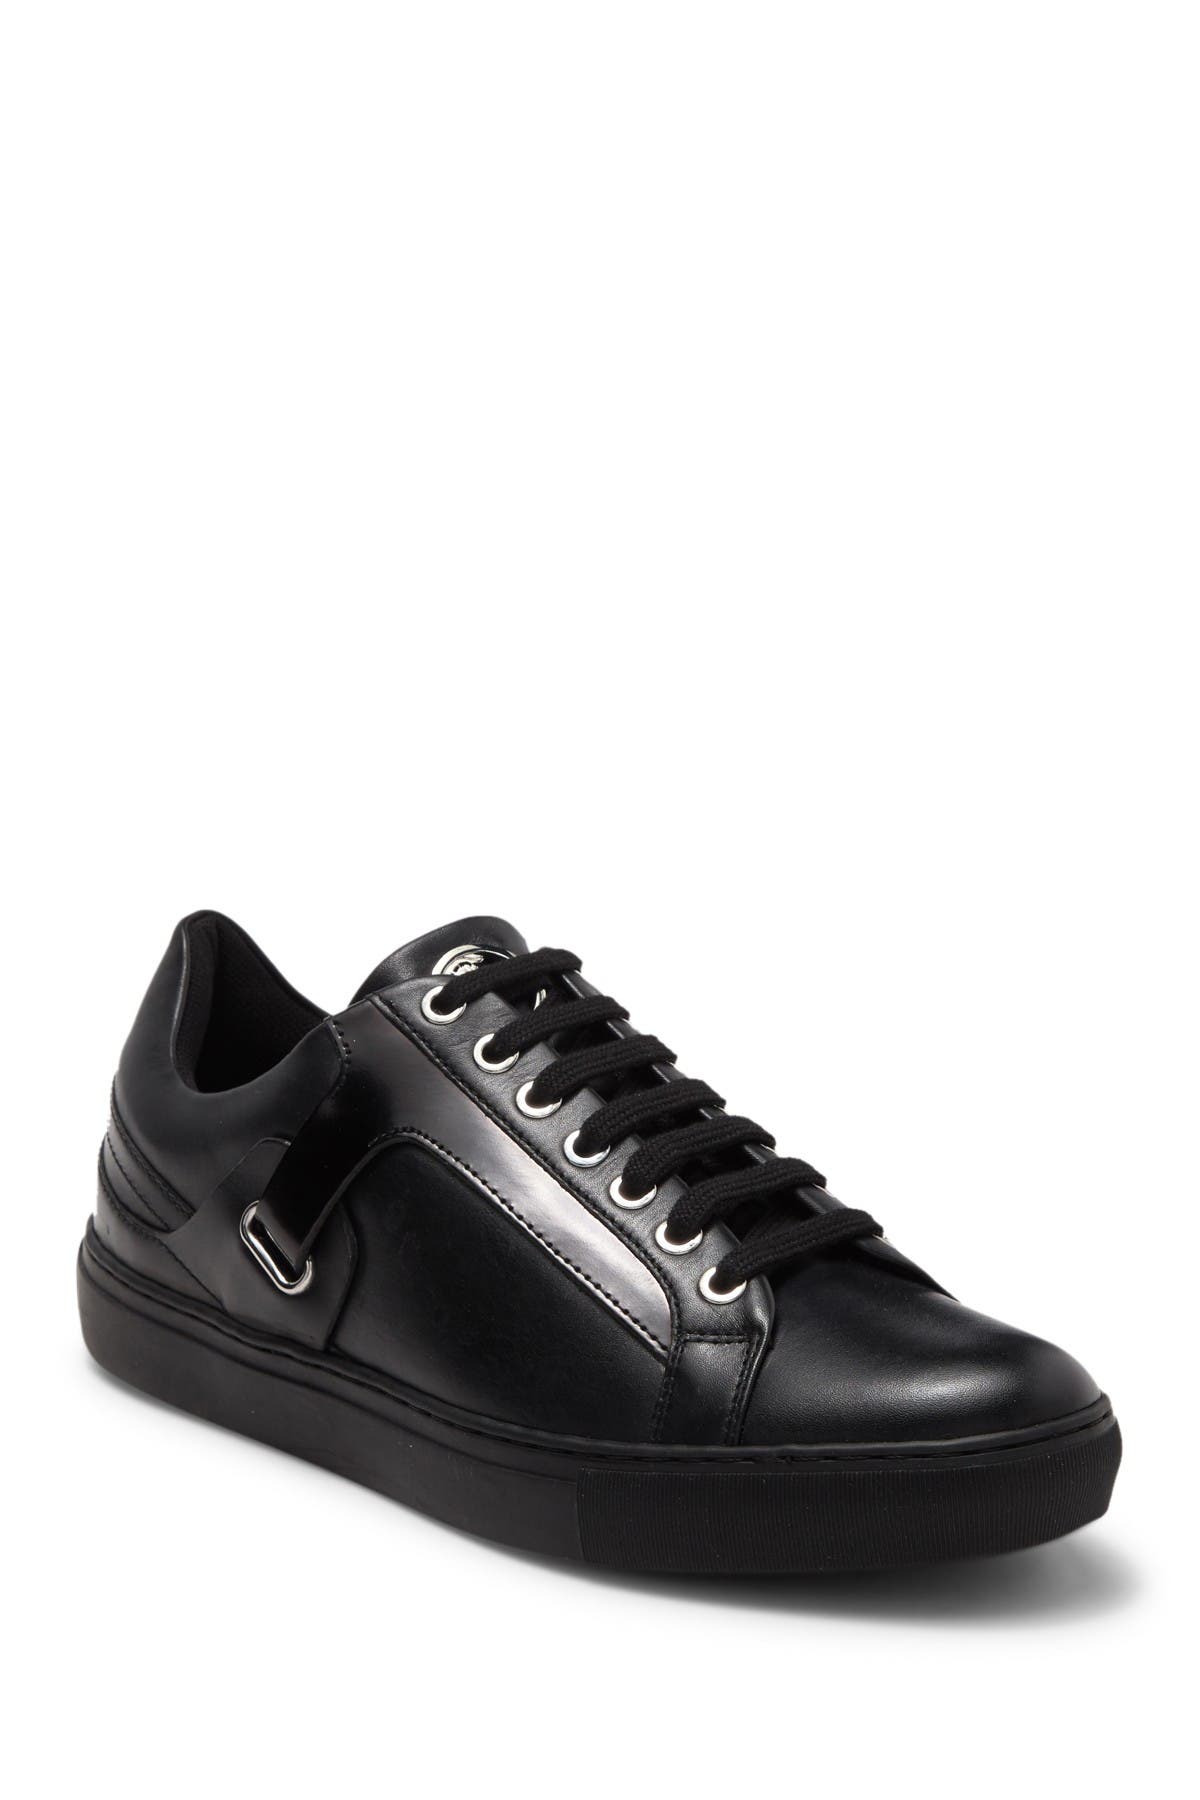 Versace Casual Leather Sneaker 